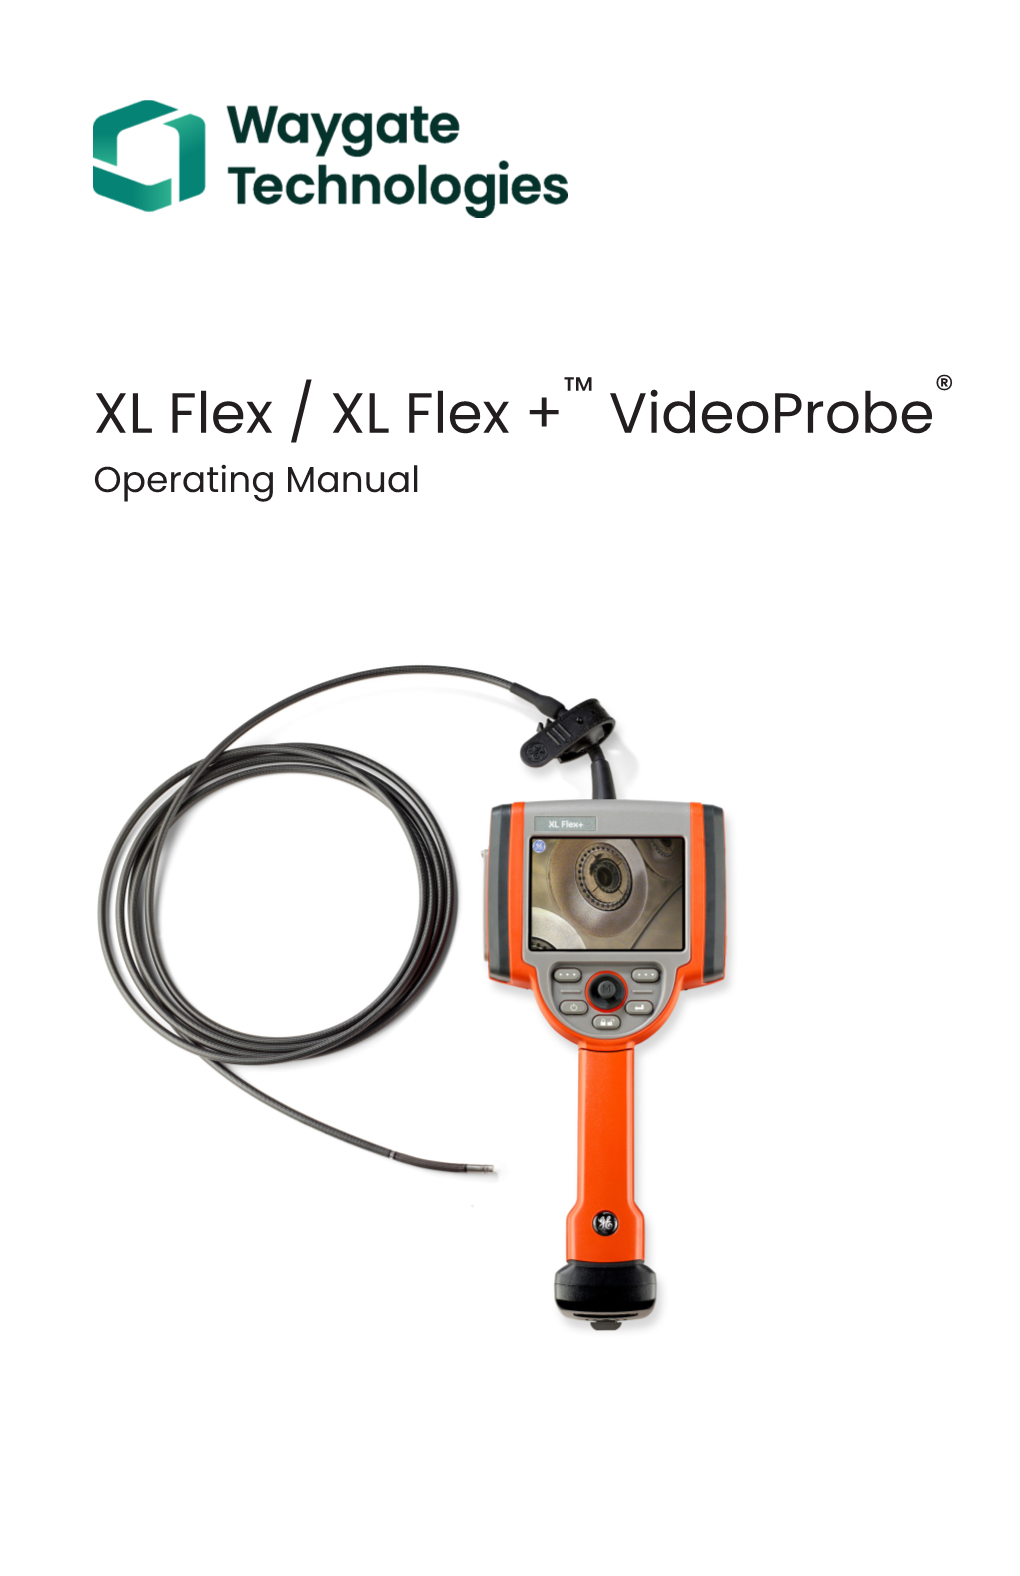 XL Flex / XL Flex + Videoprobe Operating Manual Table of Contents Chapter 1: Introlduction